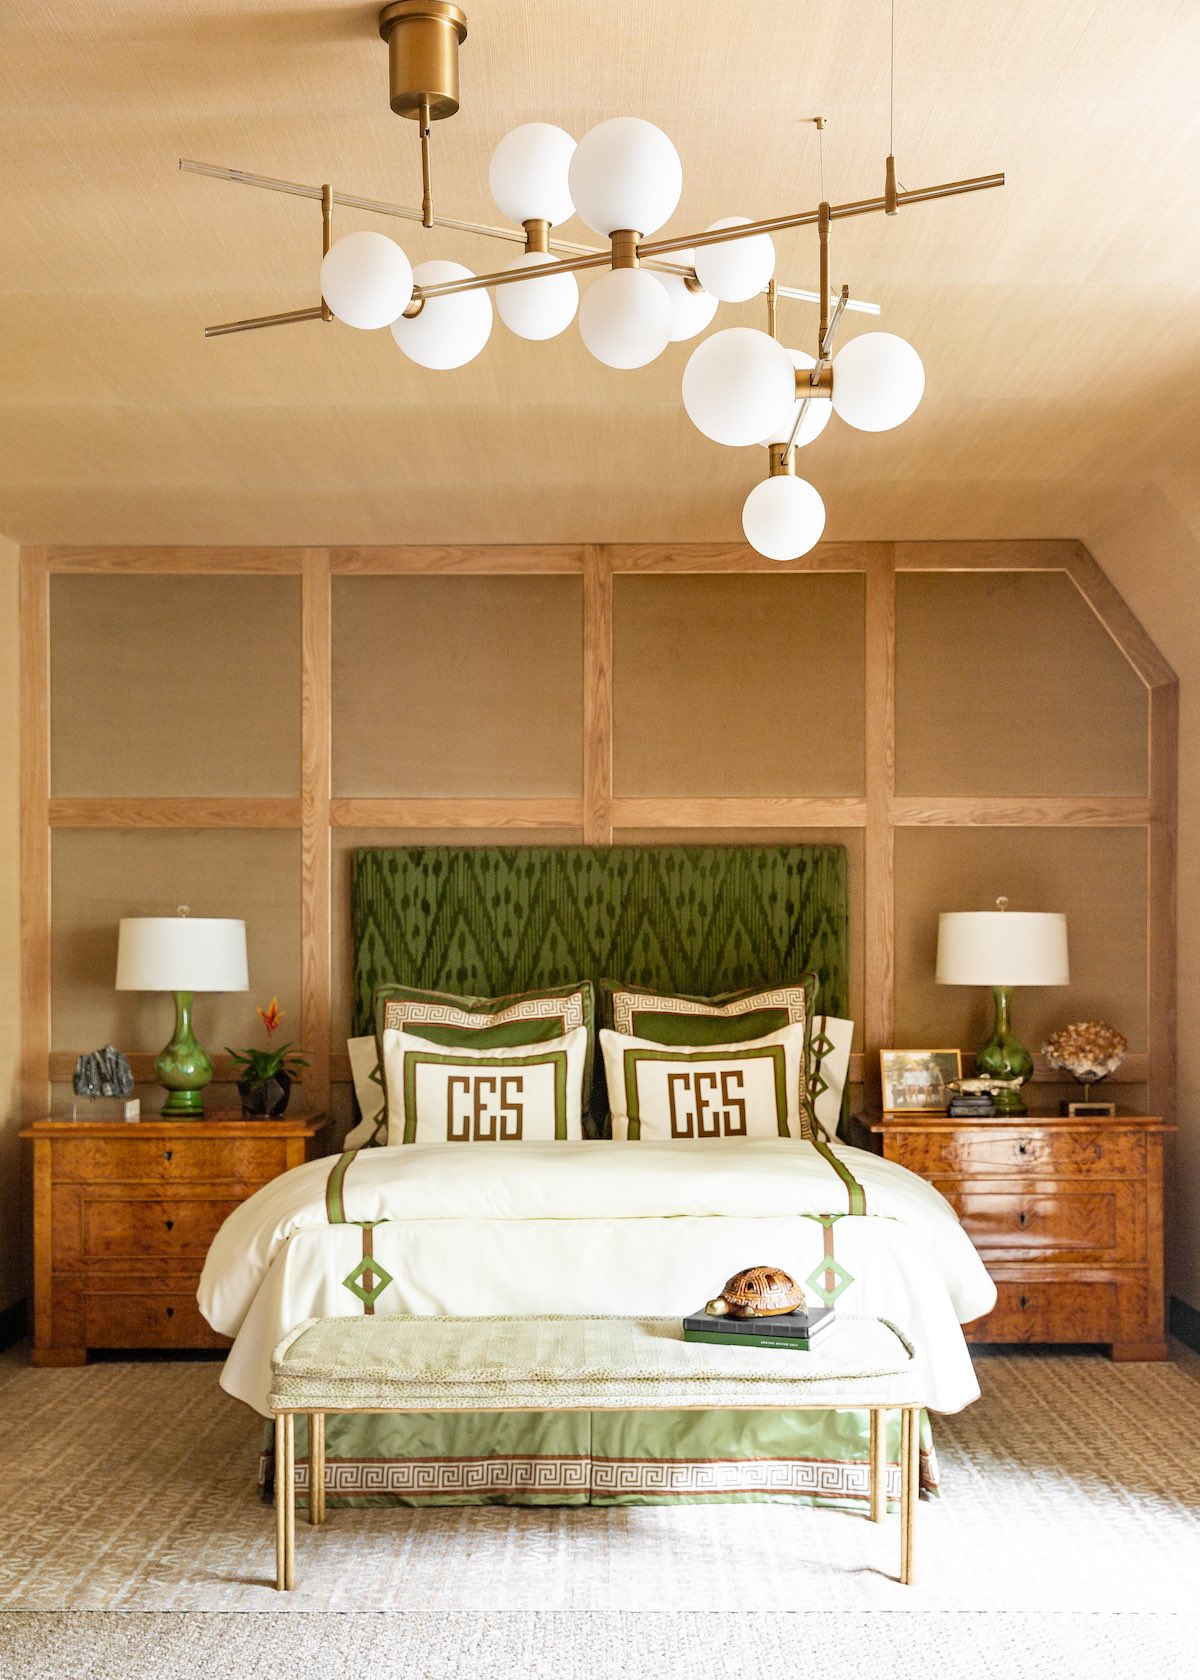 Fort Worth designer Trish Sheats creates balance and drama in a guest room with ceramic bedside table lamps and a bold contemporary sputnik-like ceiling light fixture.